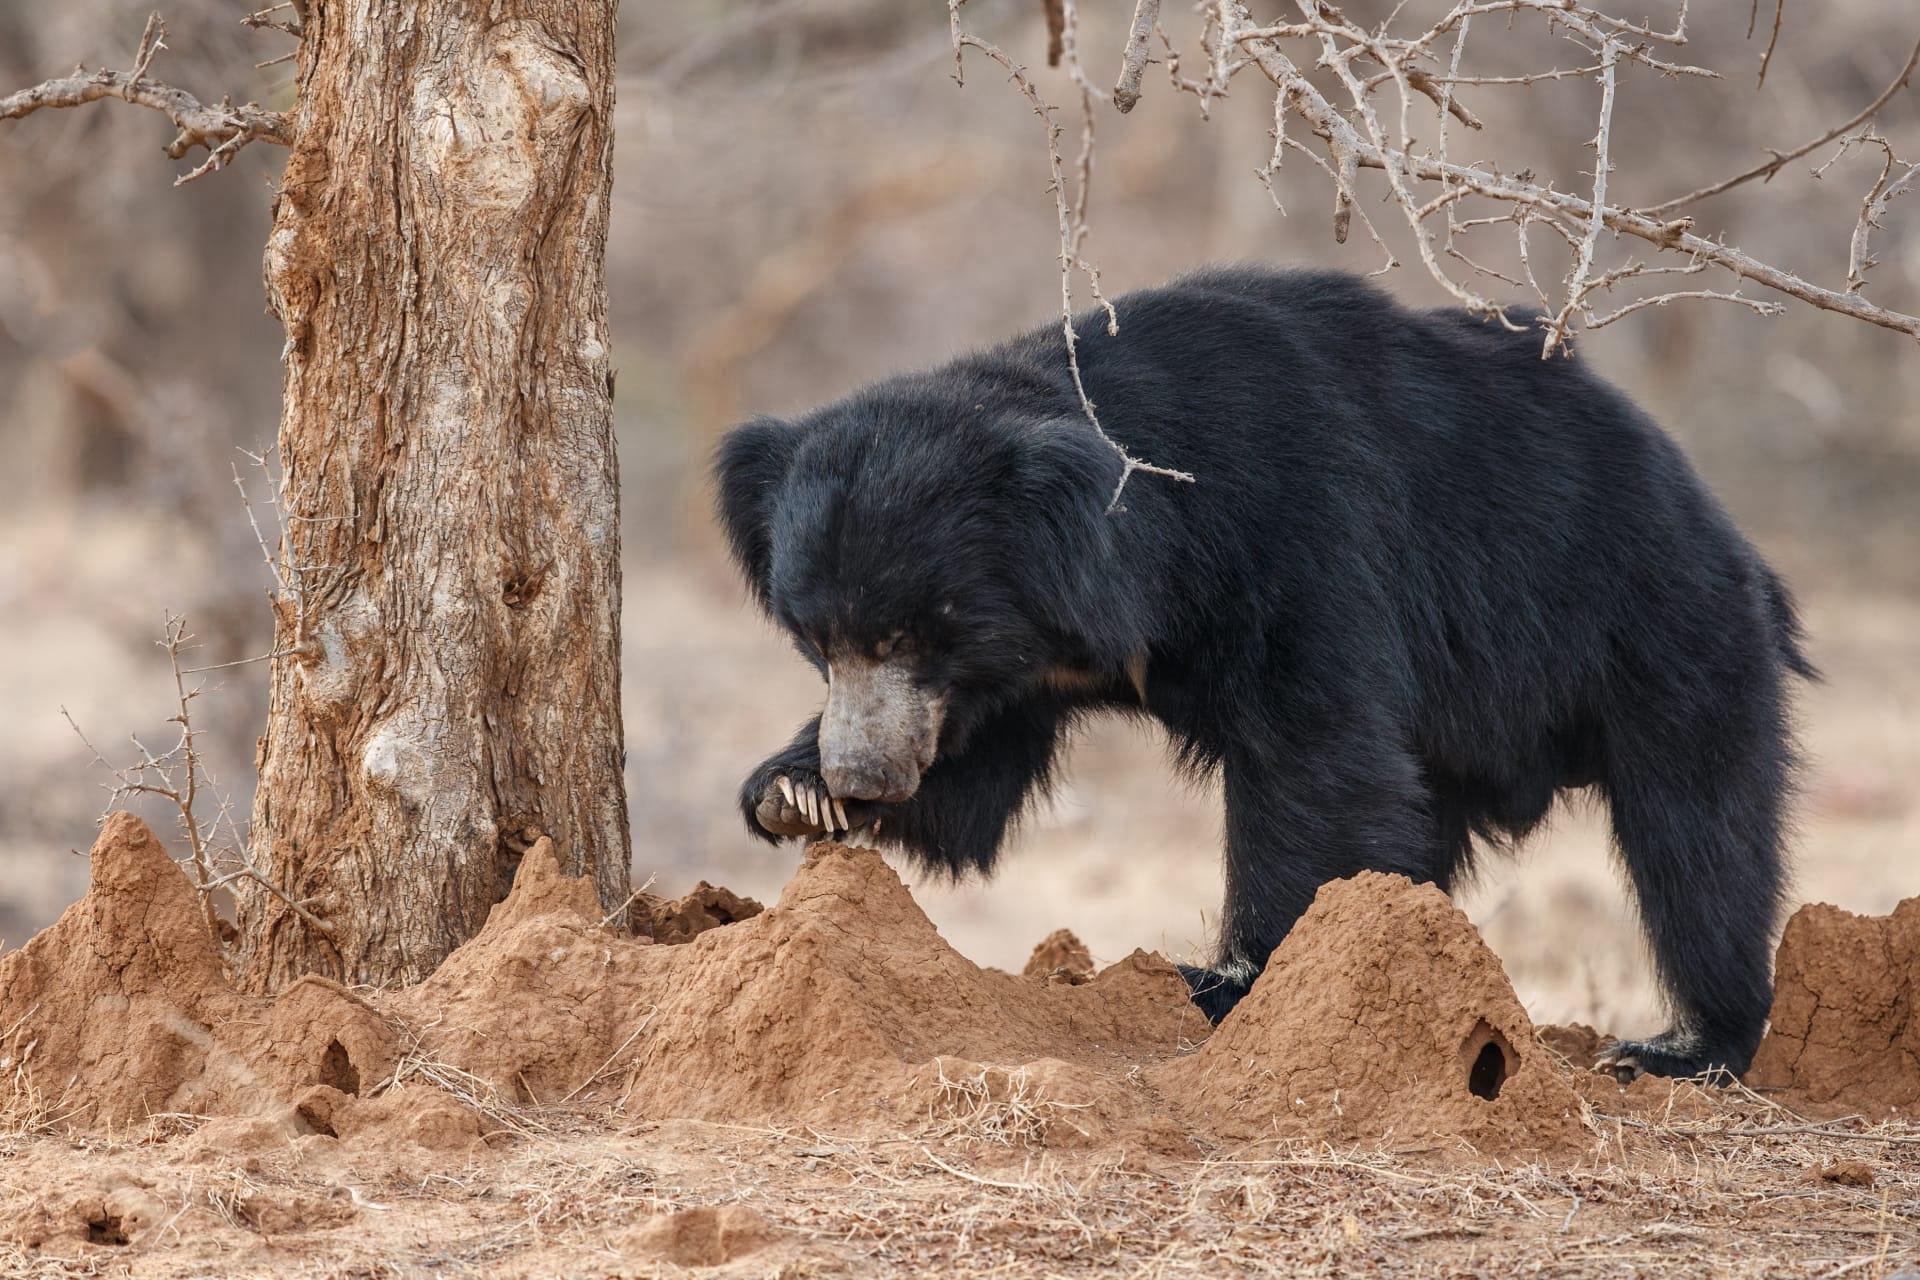 Sloth bear pictures